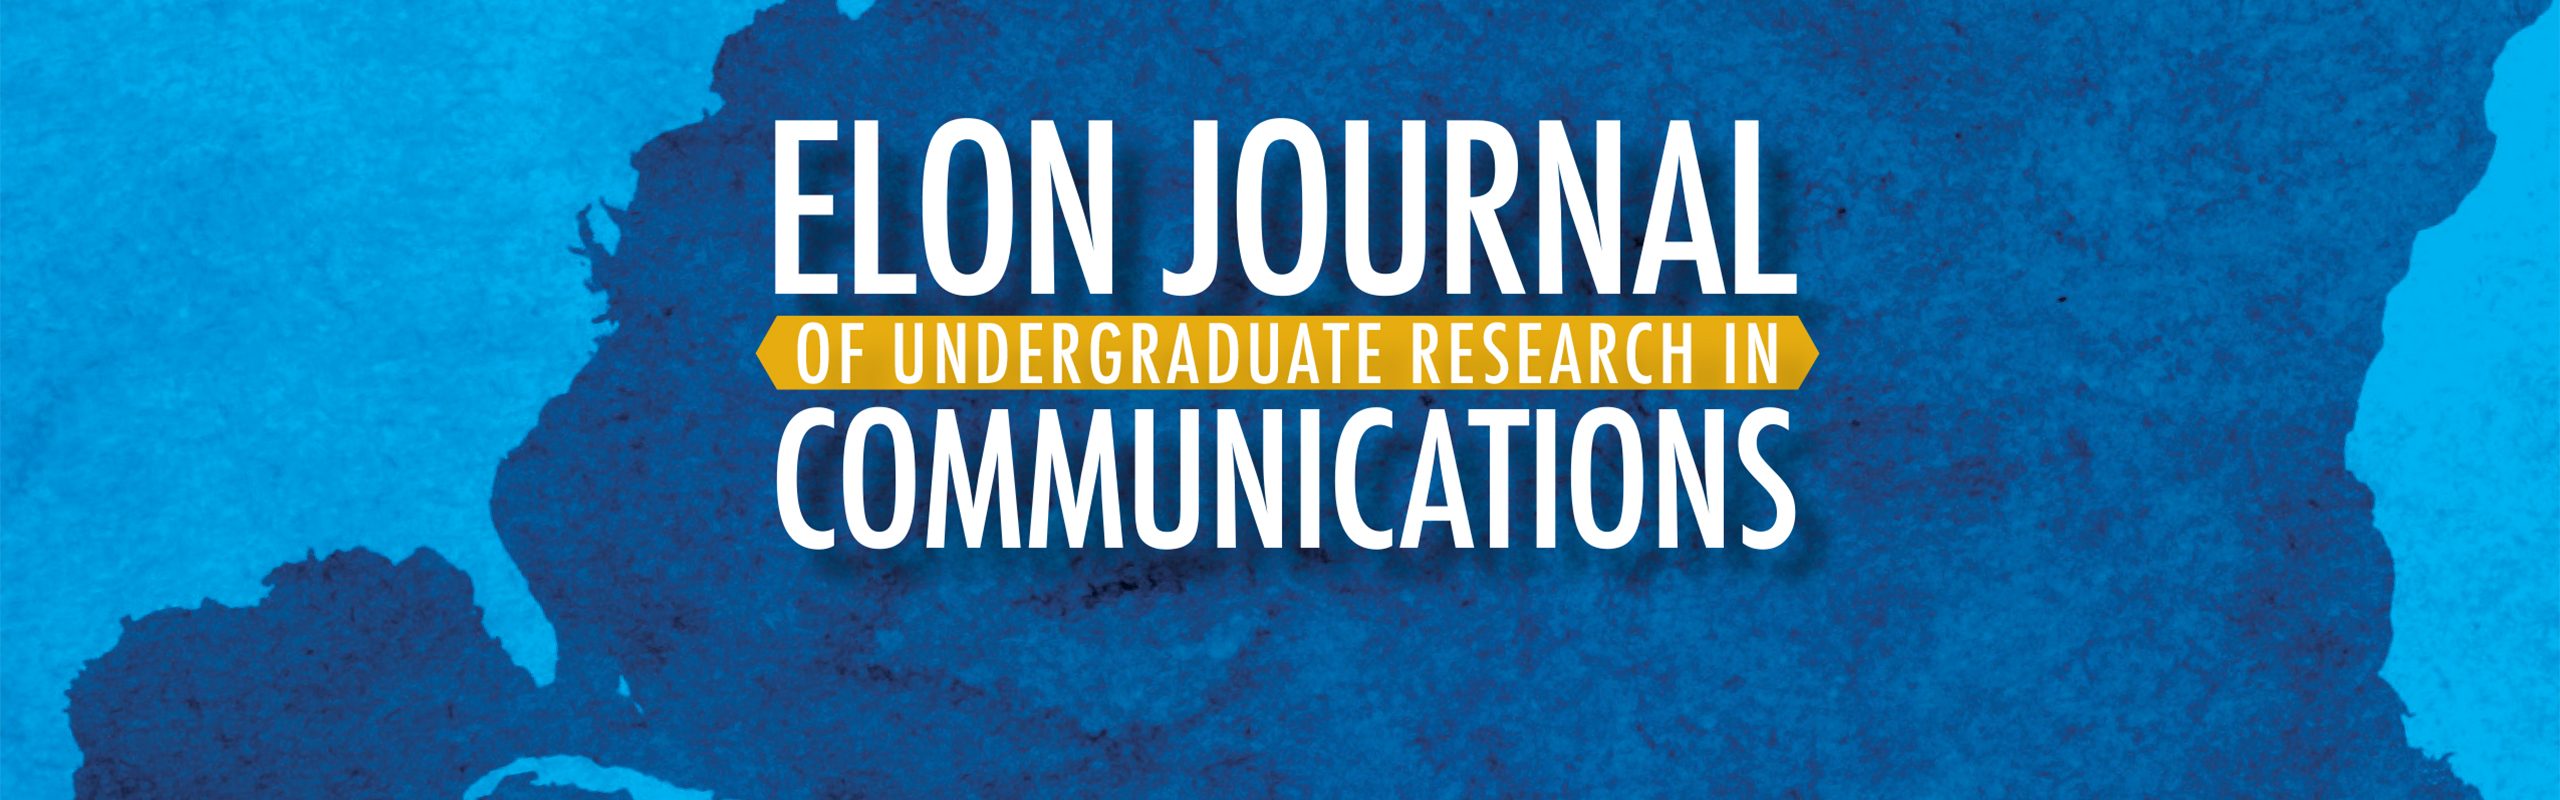 Elon Journal of Undergraduate Research in Communications Spring 2017 Issue image